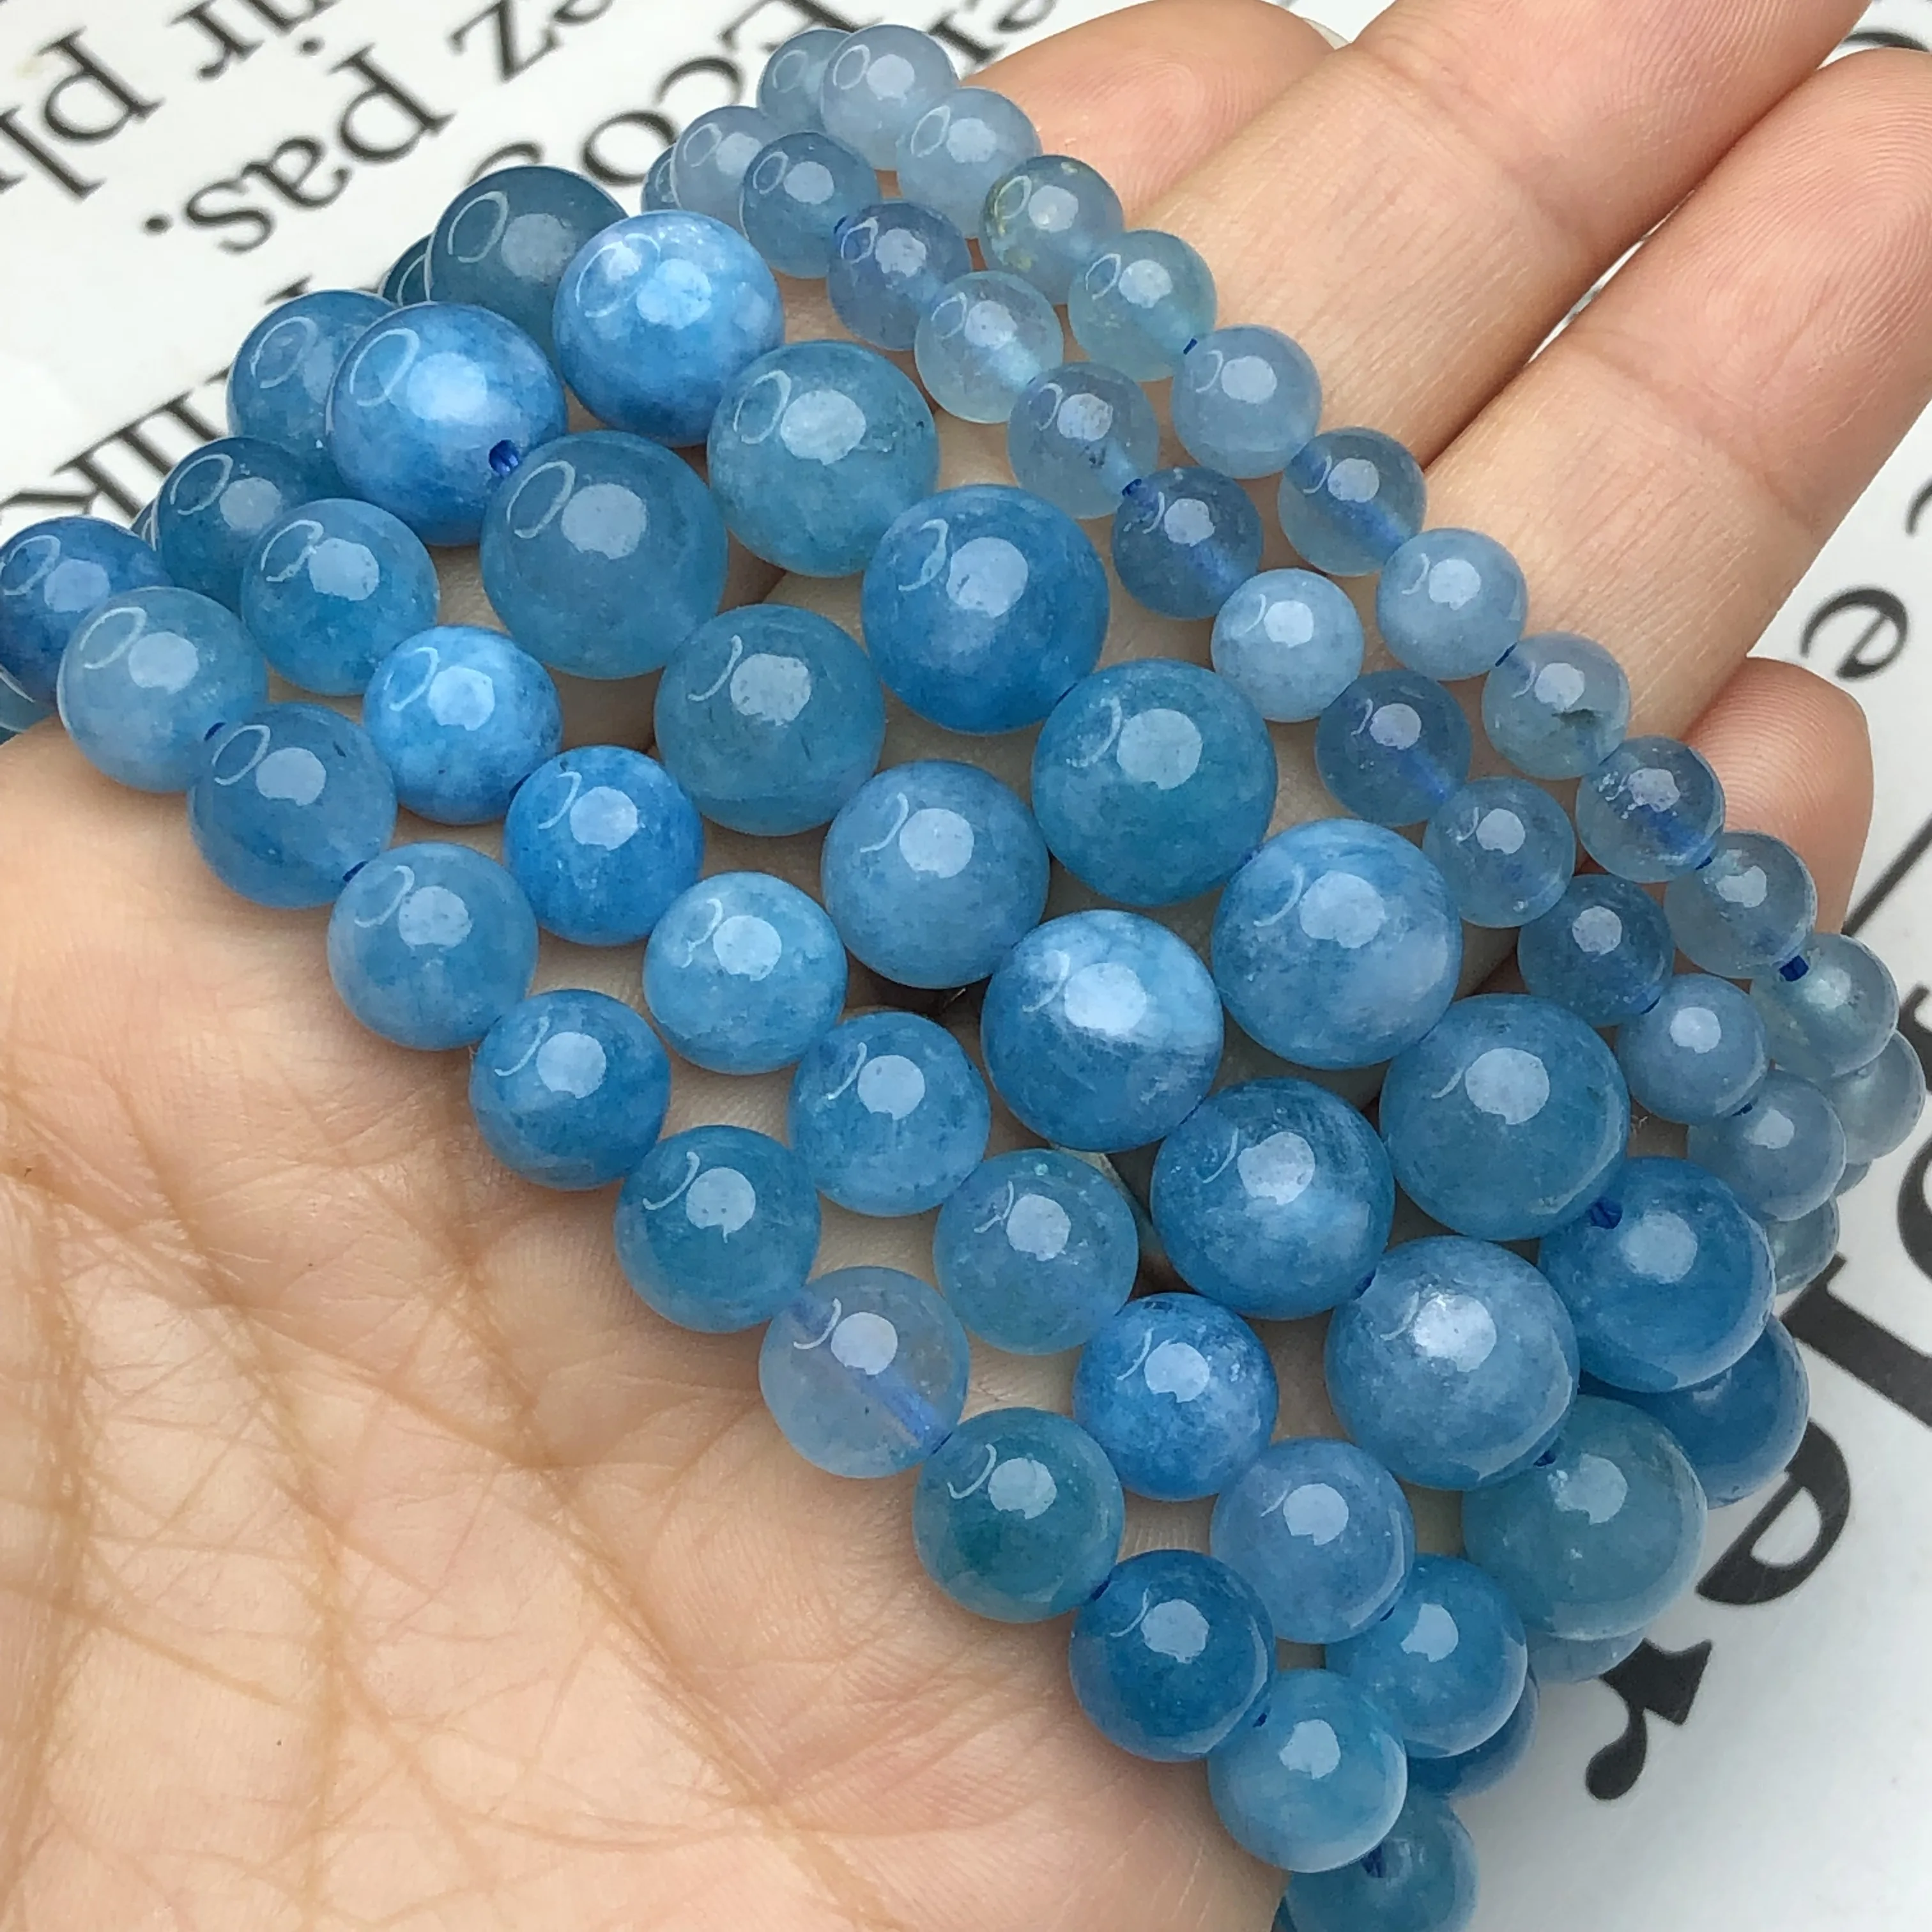 

Natural Stone Dark Blue Aquamarines Crysyal Loose Spacer Chalcedony Beads For Diy Jewelry Making Bracelet Necklace 6/8/10mm 15”